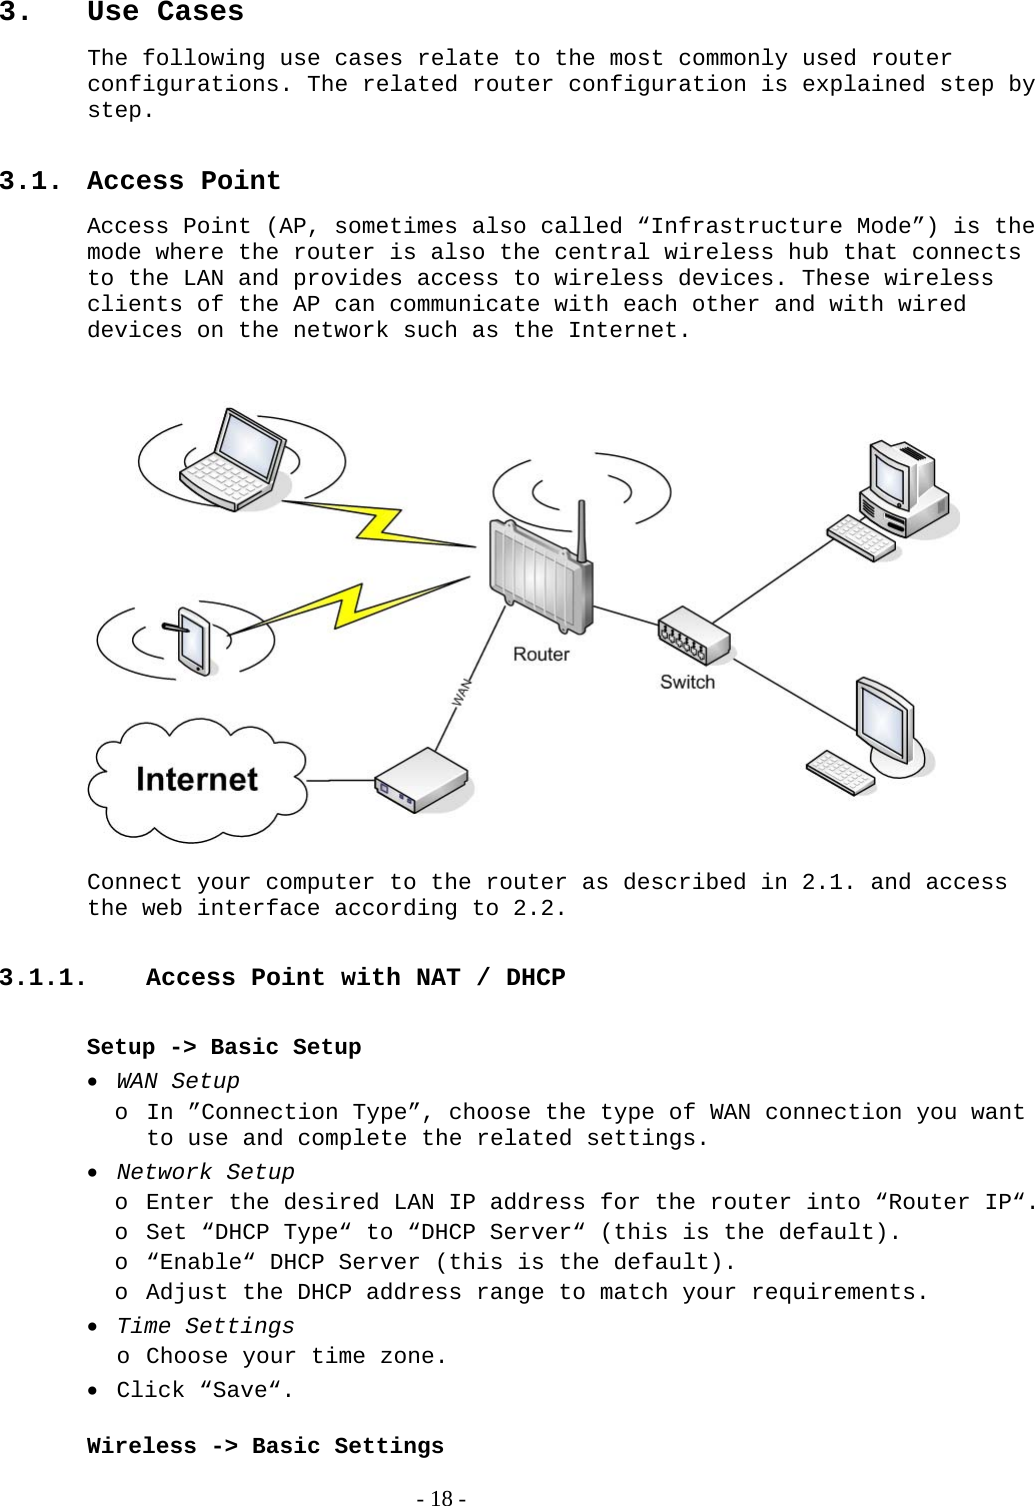 3. Use Cases The following use cases relate to the most commonly used router configurations. The related router configuration is explained step by step.   3.1. Access Point Access Point (AP, sometimes also called “Infrastructure Mode”) is the mode where the router is also the central wireless hub that connects to the LAN and provides access to wireless devices. These wireless clients of the AP can communicate with each other and with wired devices on the network such as the Internet.    Connect your computer to the router as described in 2.1. and access the web interface according to 2.2.  3.1.1.  Access Point with NAT / DHCP  Setup -&gt; Basic Setup  WAN Setup o In ”Connection Type”, choose the type of WAN connection you want to use and complete the related settings.  Network Setup o Enter the desired LAN IP address for the router into “Router IP“.  o Set “DHCP Type“ to “DHCP Server“ (this is the default). o “Enable“ DHCP Server (this is the default). o Adjust the DHCP address range to match your requirements.  Time Settings o Choose your time zone.  Click “Save“.  Wireless -&gt; Basic Settings   - 18 - 